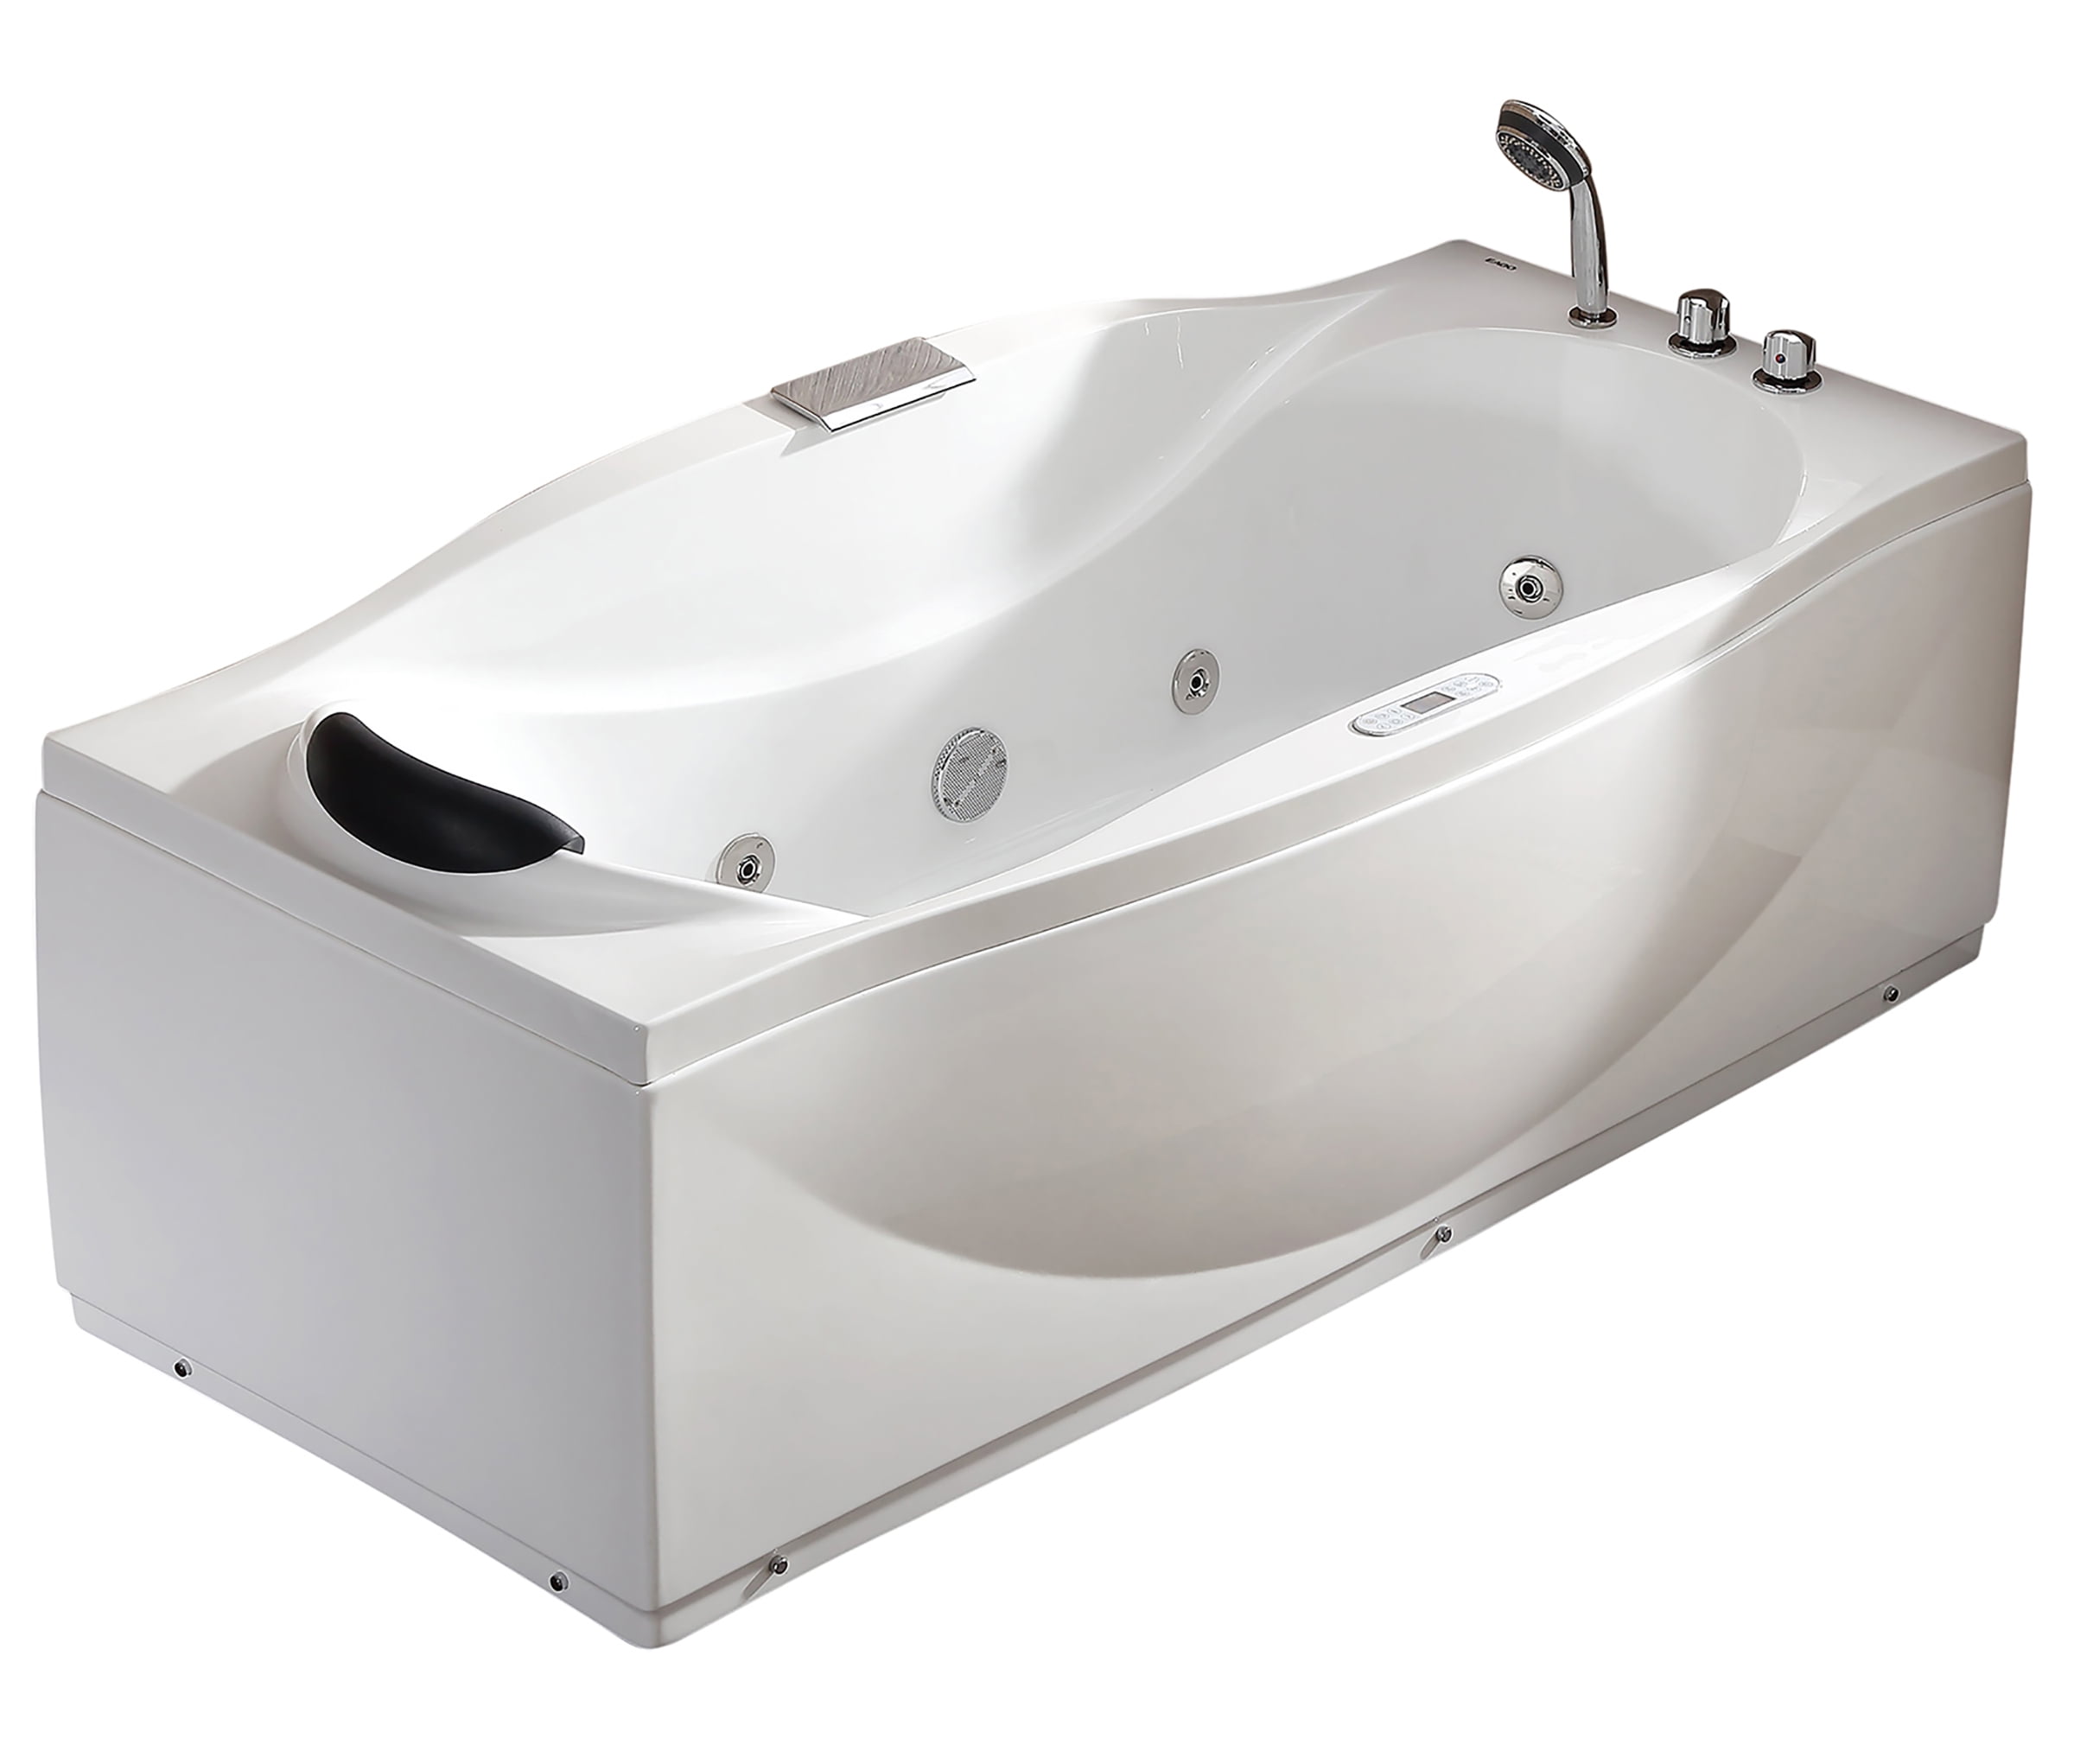 Picture of Eago AM189ETL-R 6 ft. Right Drain Acrylic White Whirlpool Bathtub with Fixtures